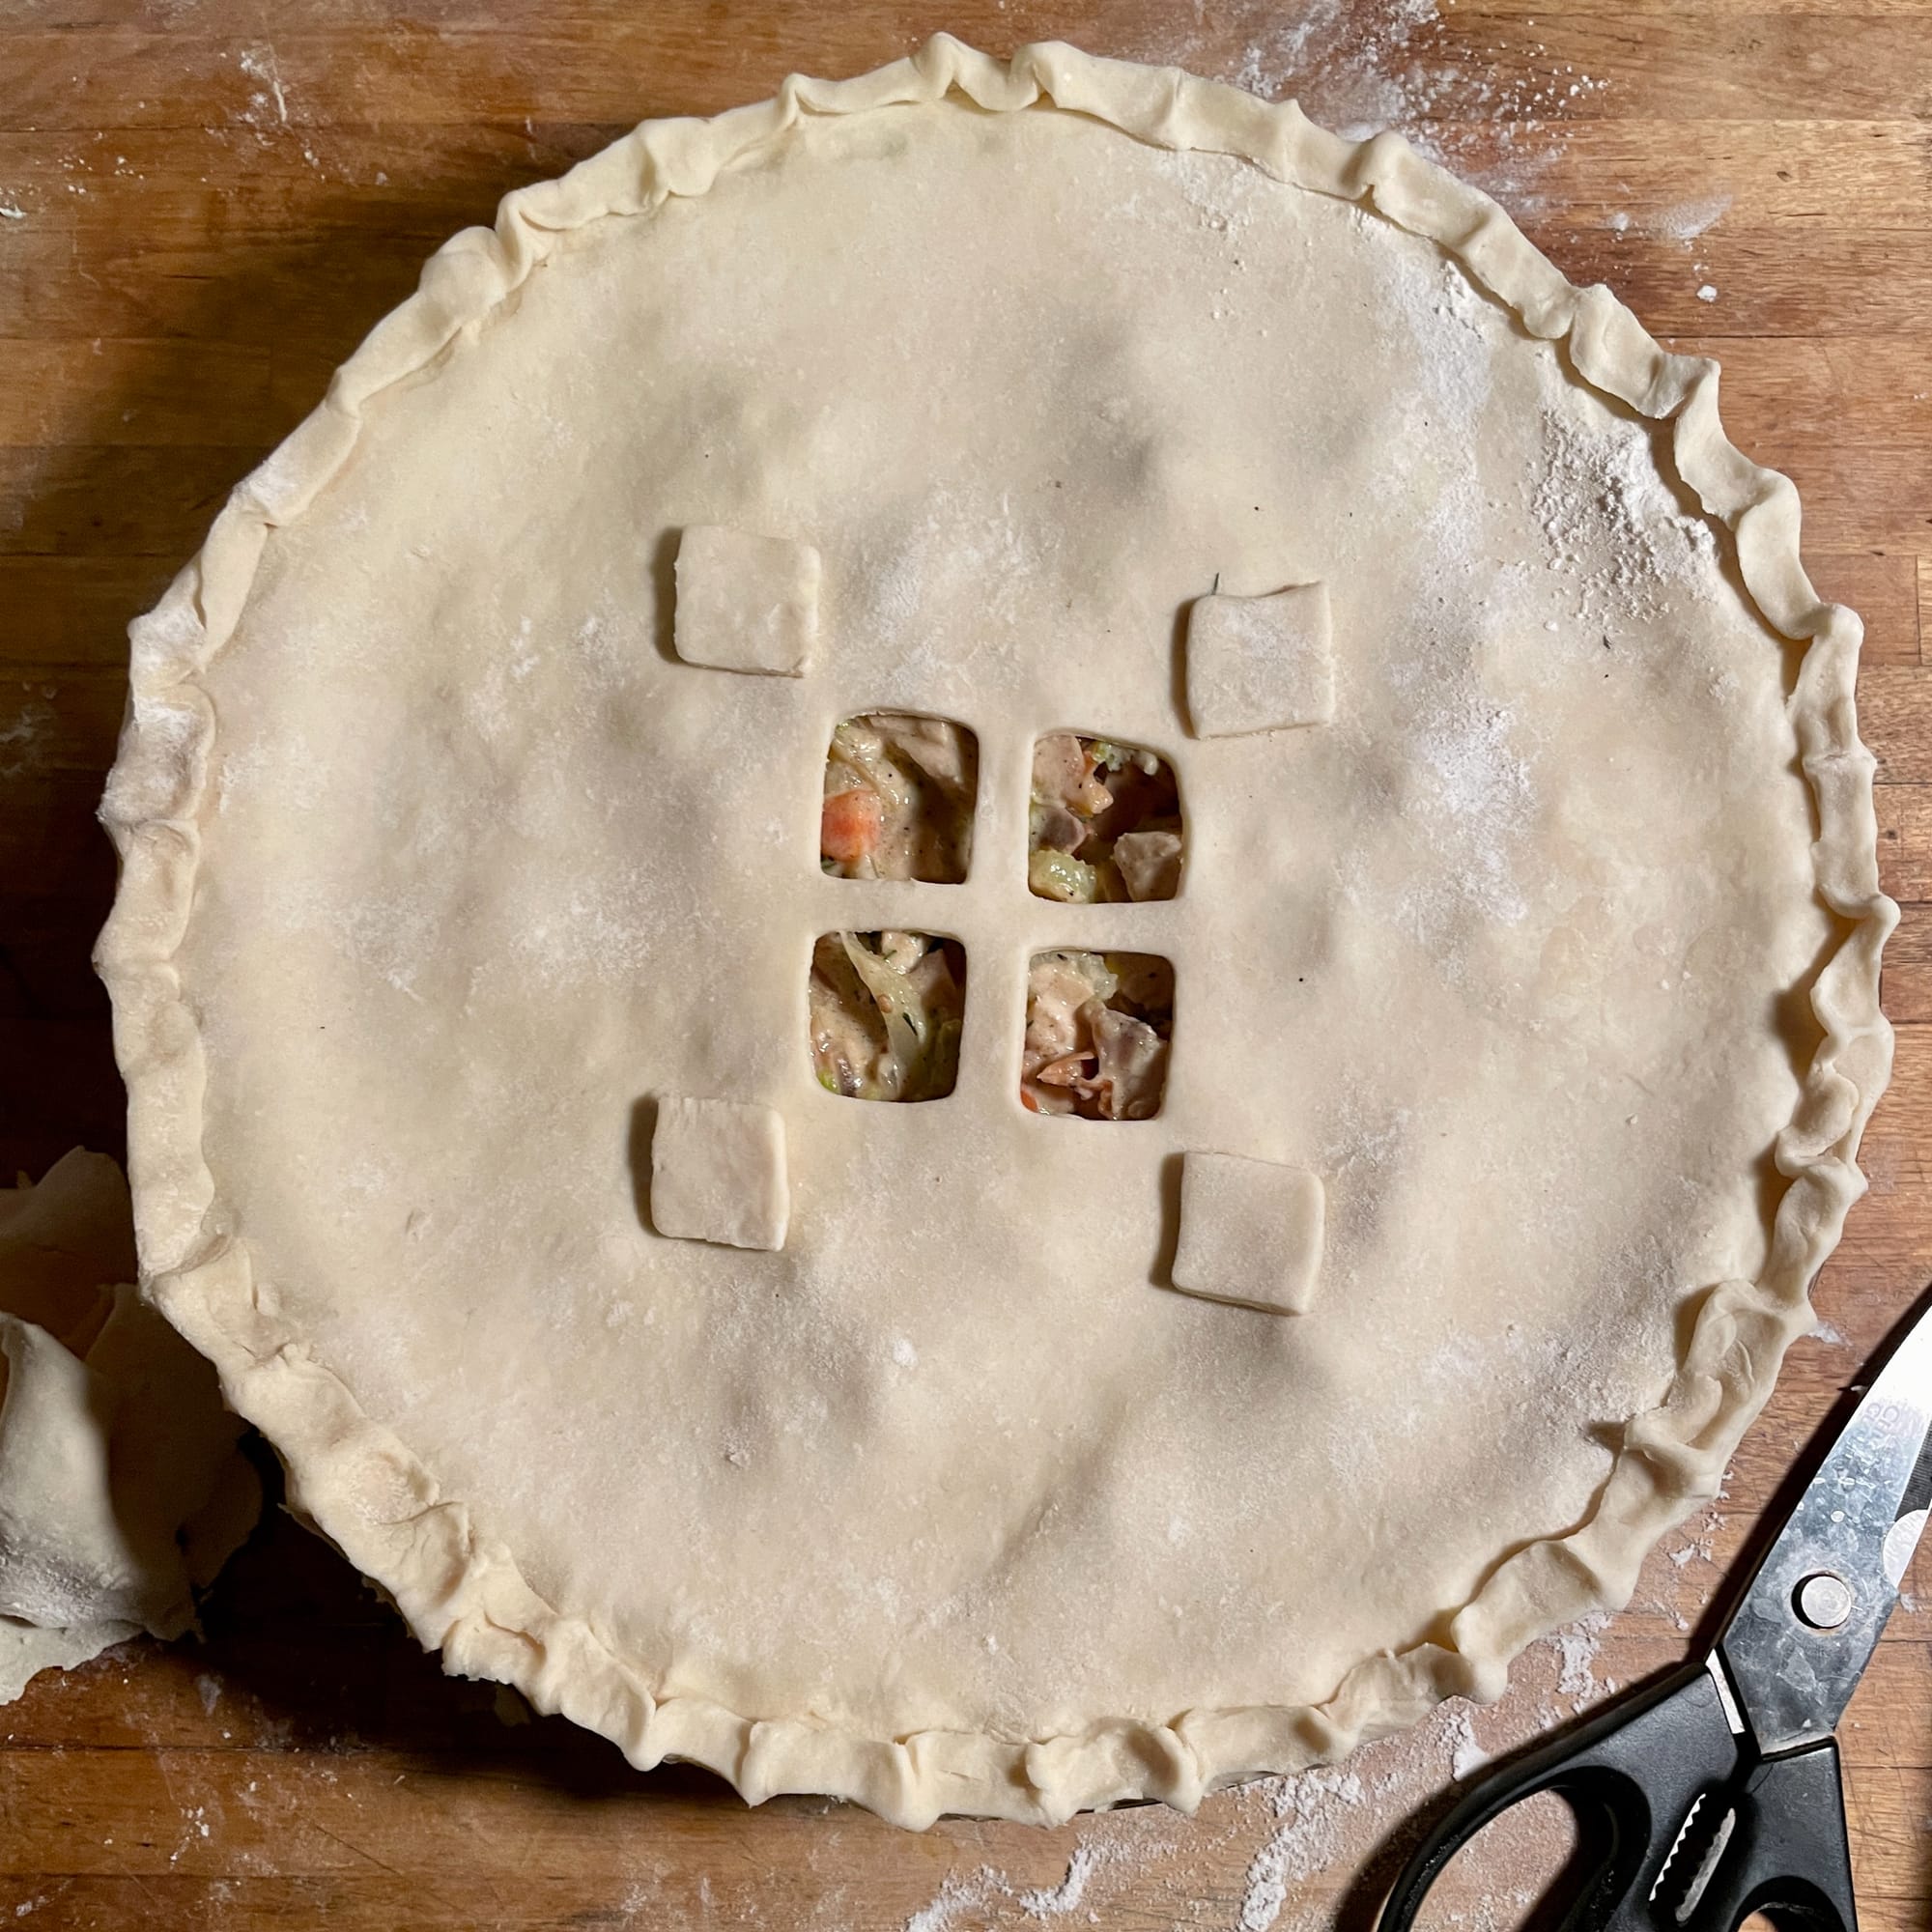 The Best Leftovers From Thanksgiving - Turkey Pot Pie